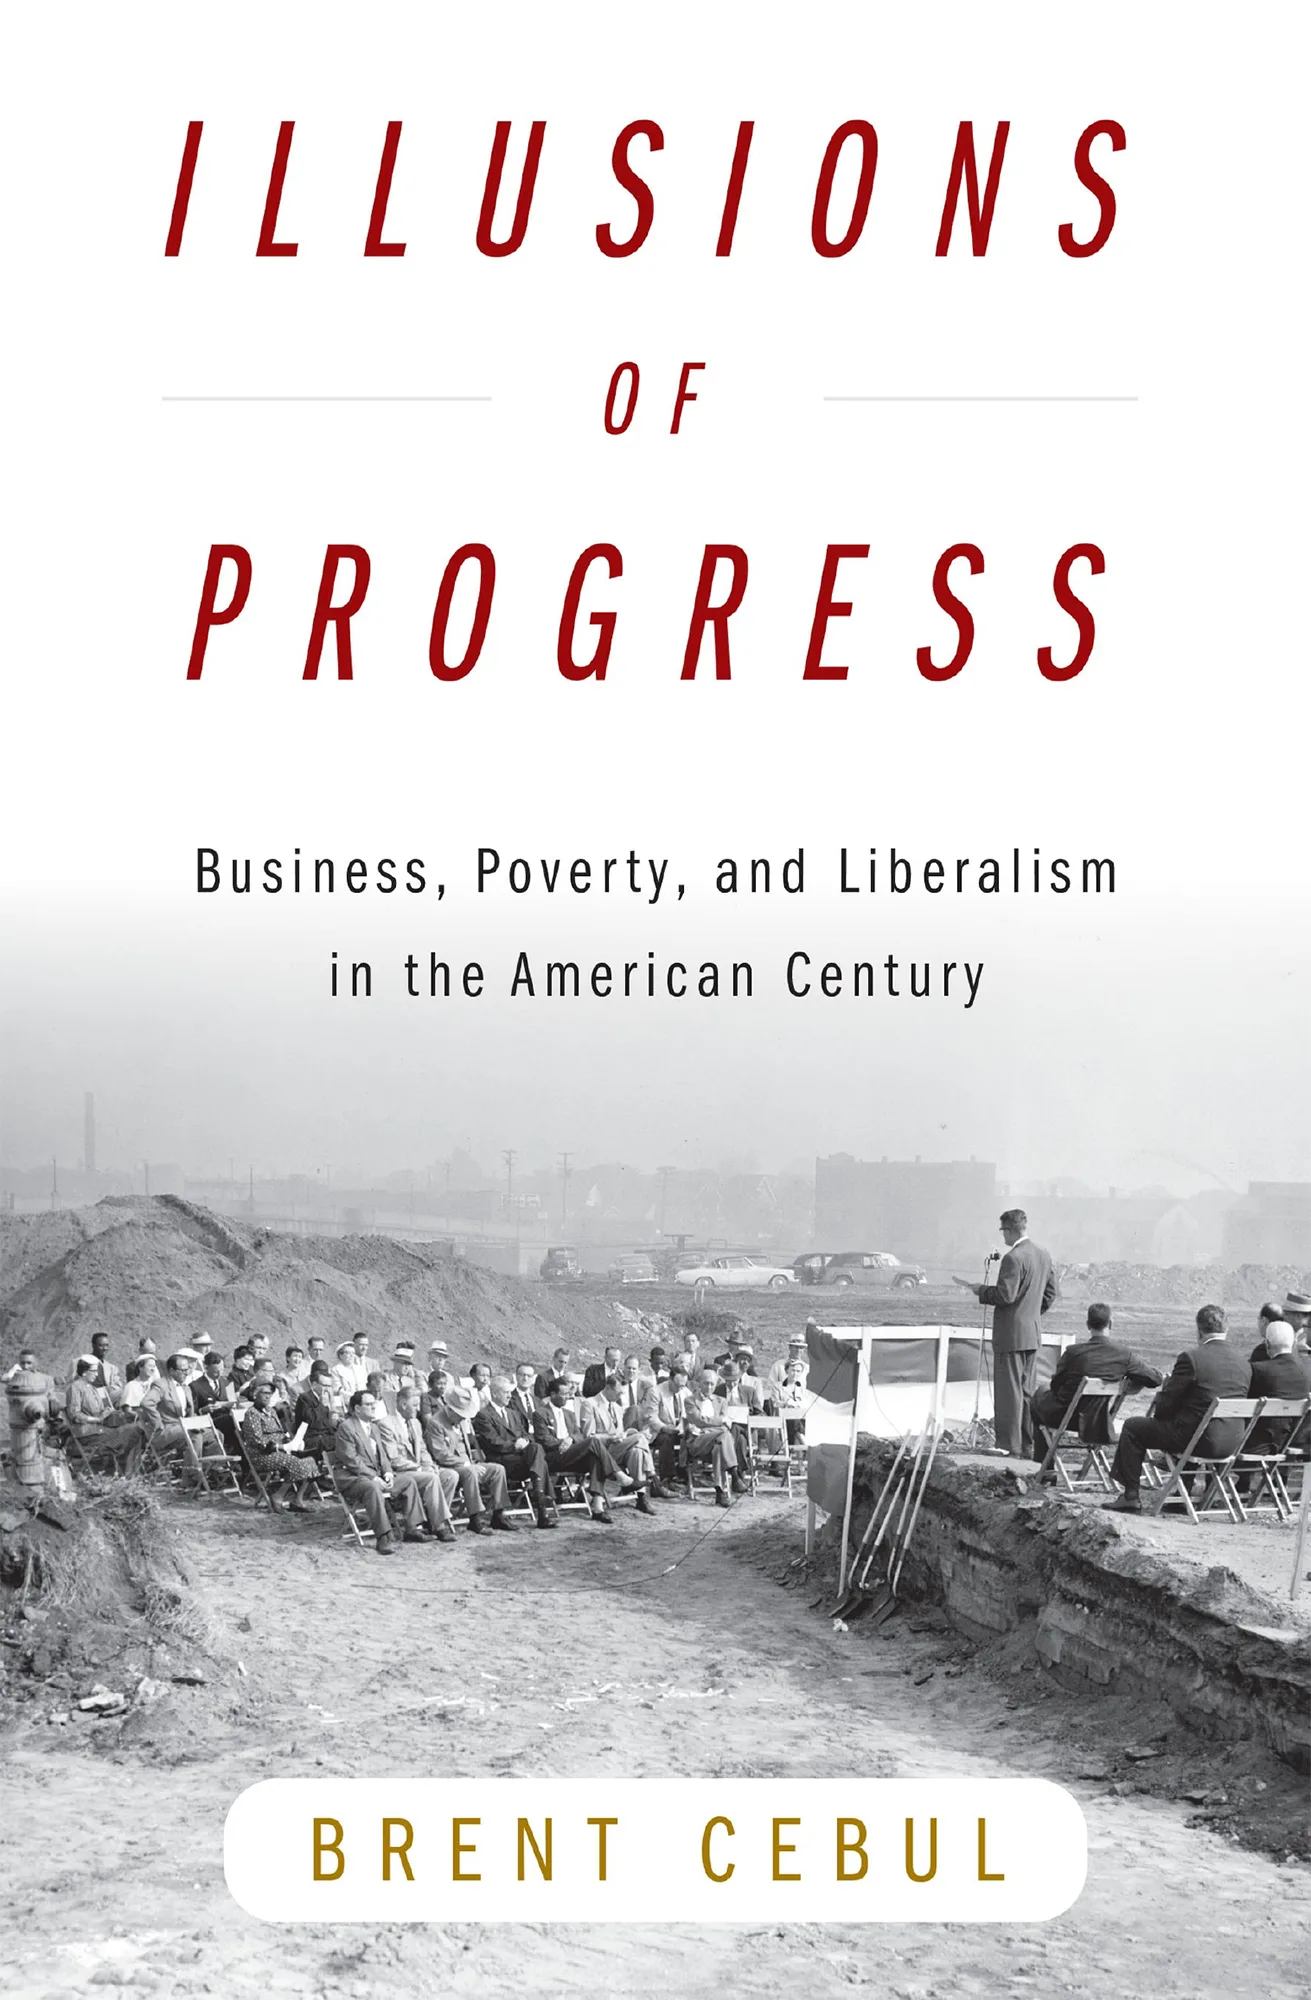 Book jacket for Illusions of Progress by Brent Cebul.